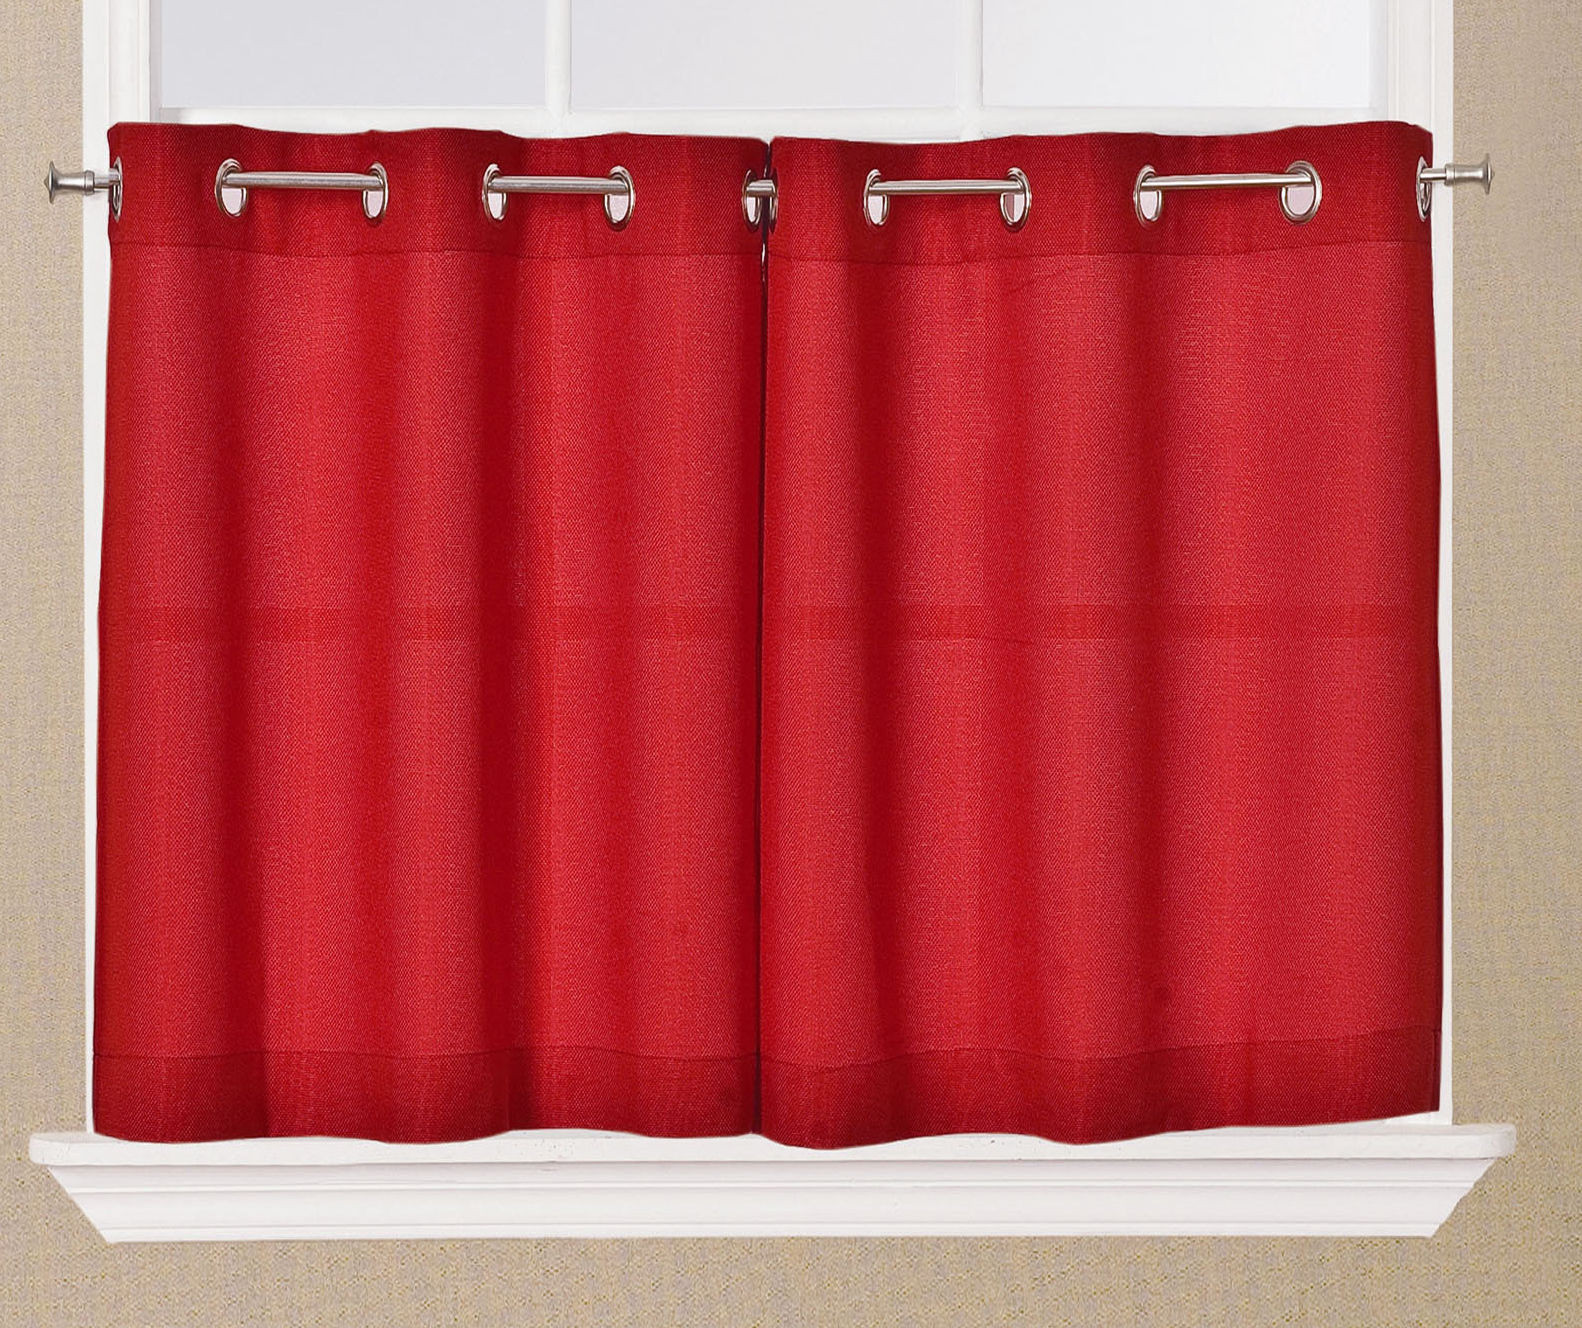 Red Valance Curtains For Kitchen
 Jackson Textured Solid Red Kitchen Curtain Choice Tiers or